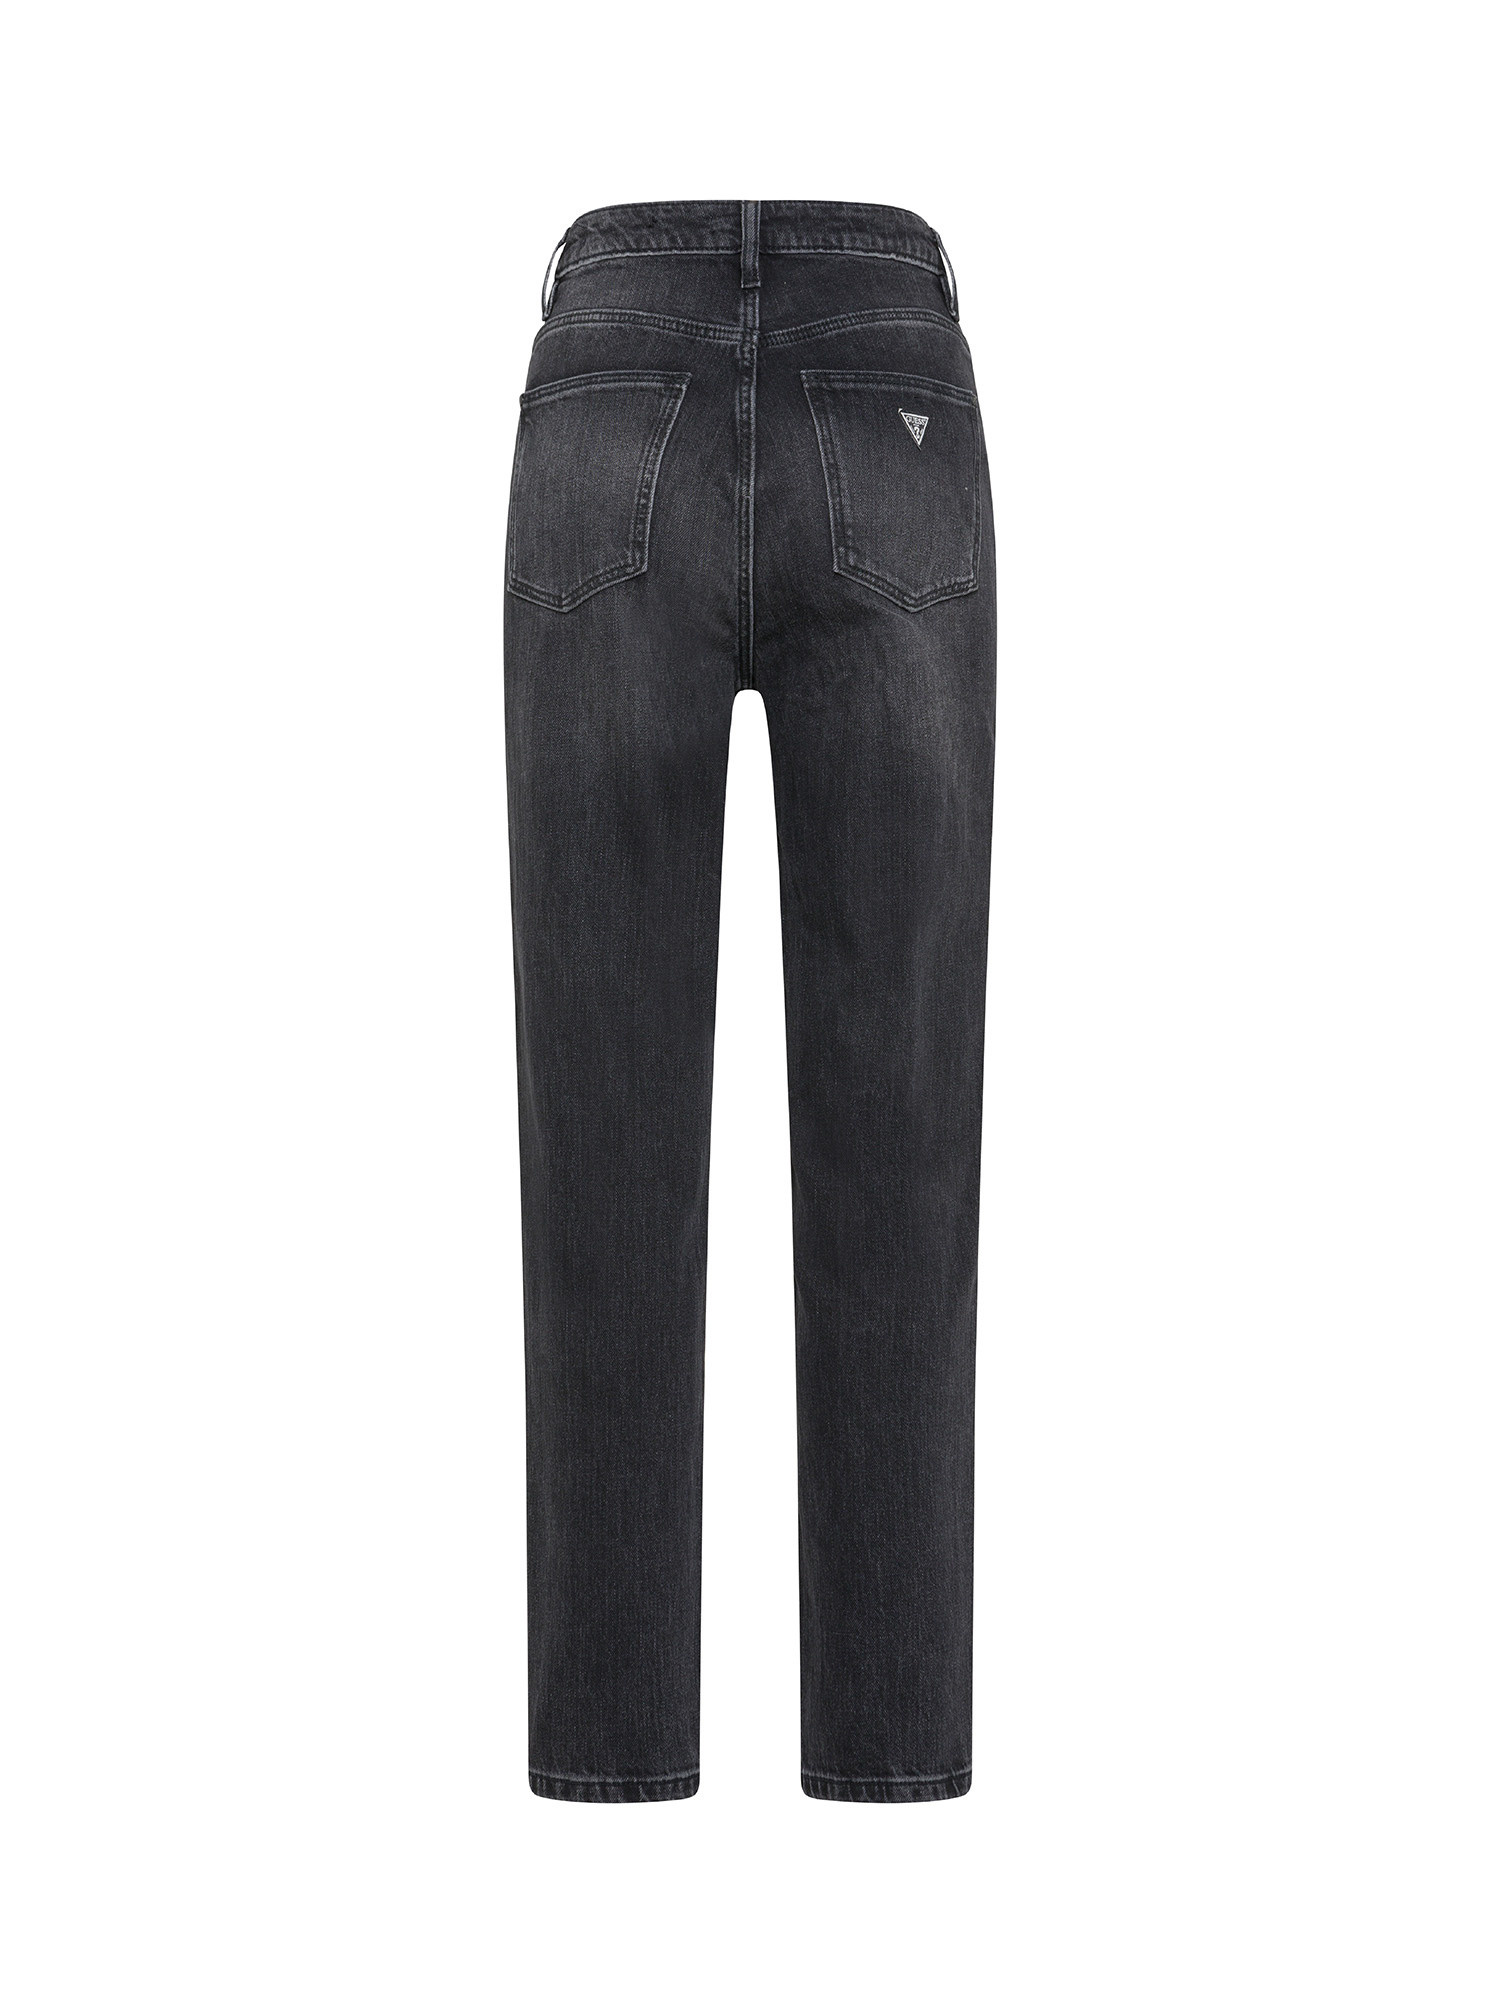 Trousers with 5 pockets, Black, large image number 1